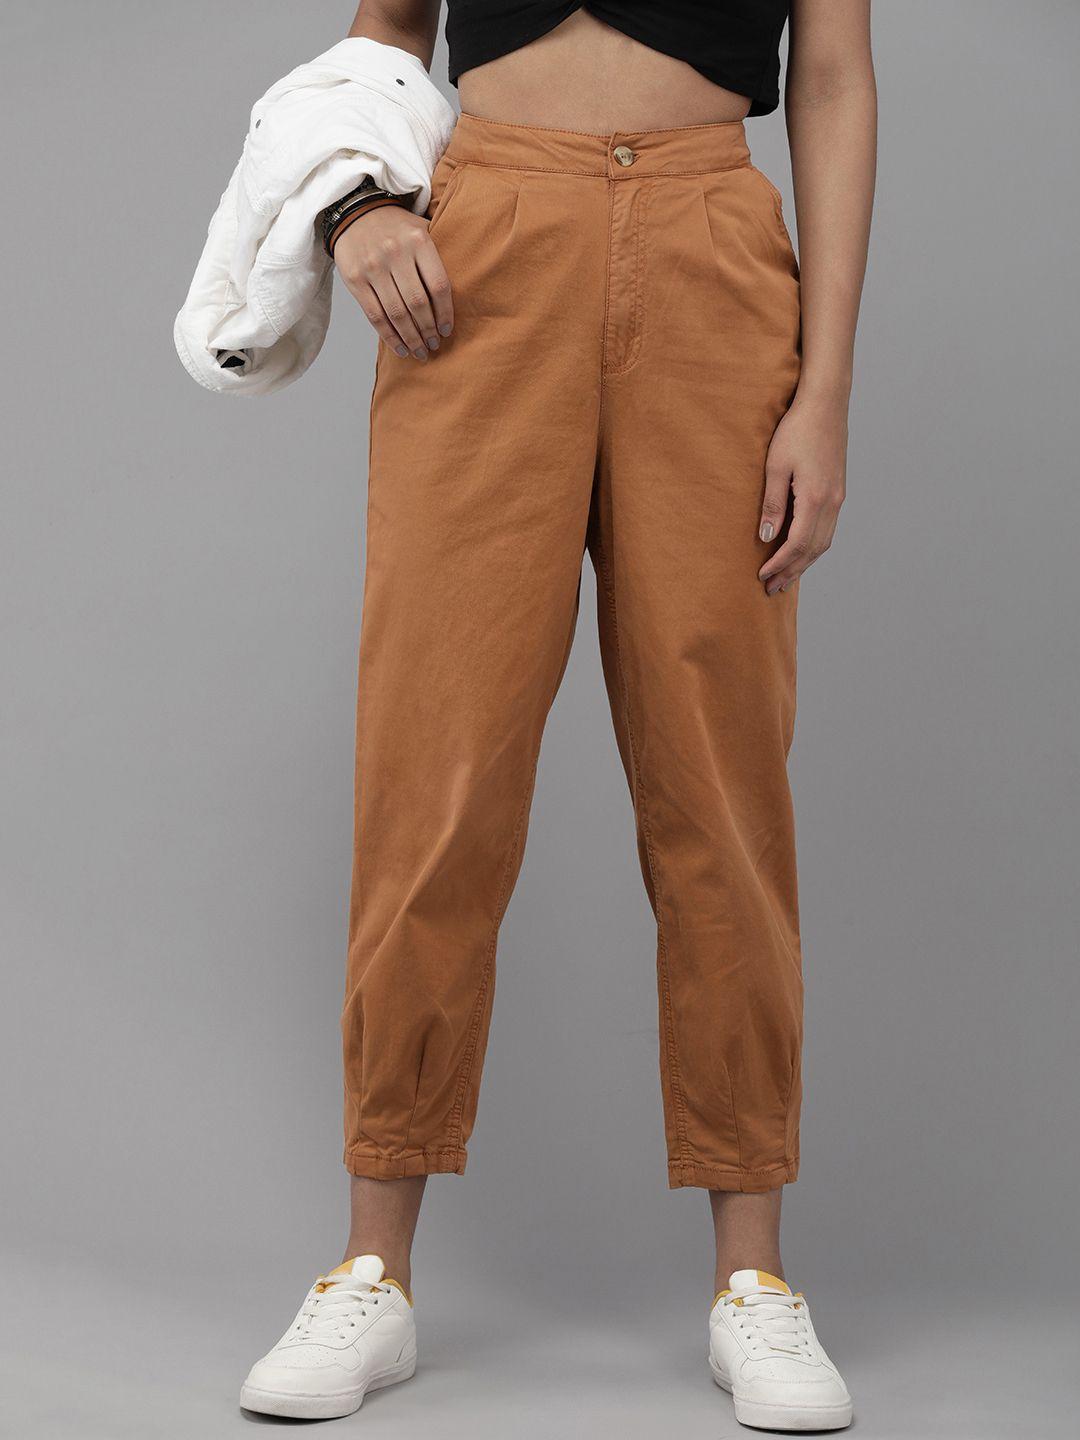 the roadster lifestyle co. women cropped trousers